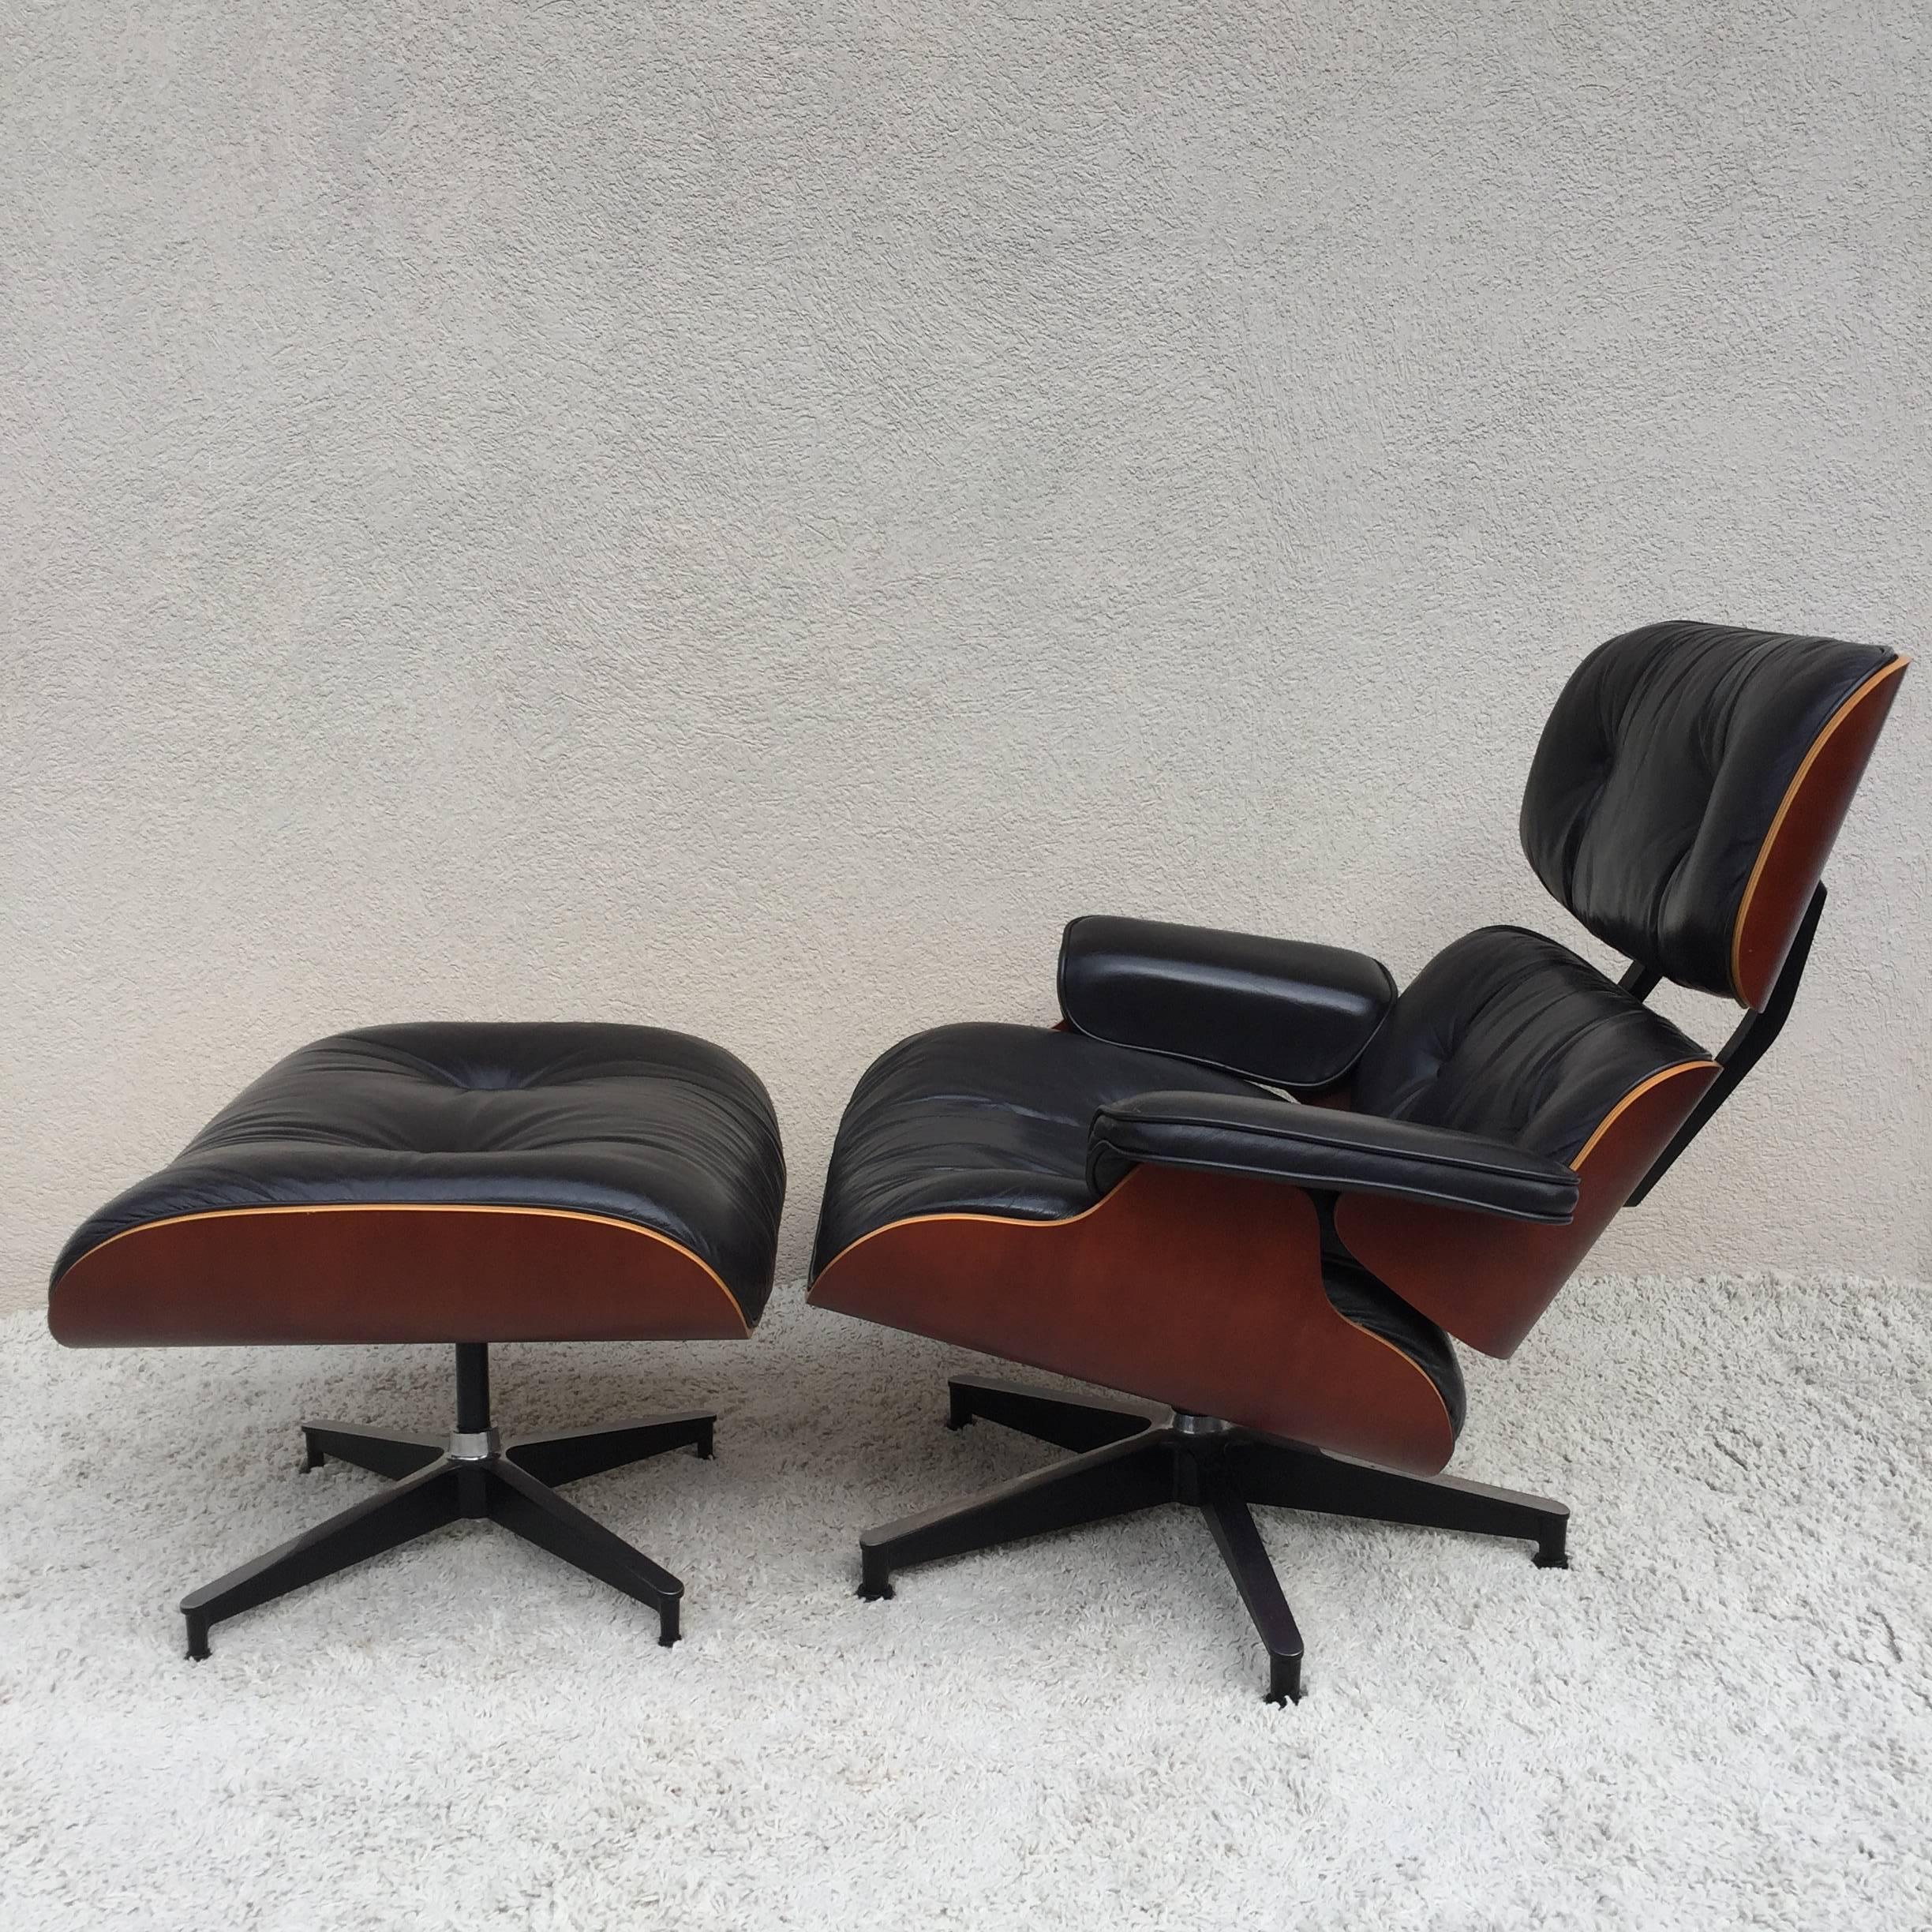 Charles Eames lounge chair and ottoman for Herman Miller, with black leather and cherrywood shell and light wood edge.

Ottoman size is 25.50 wide x 22.50 deep and 16.50" high.